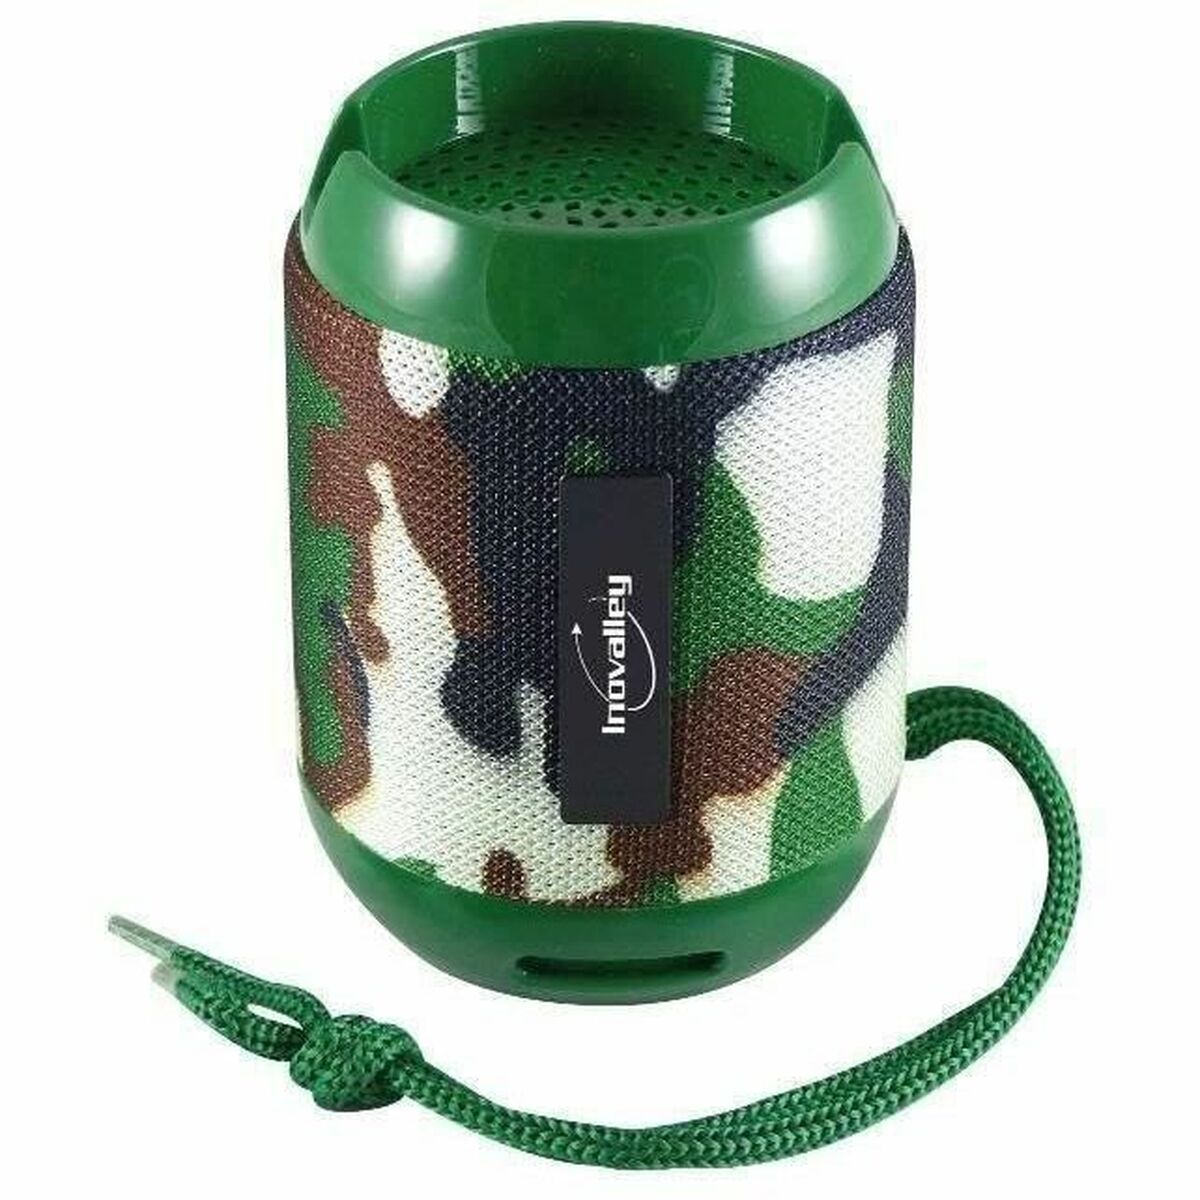 Haut-parleur portable Inovalley Camouflage